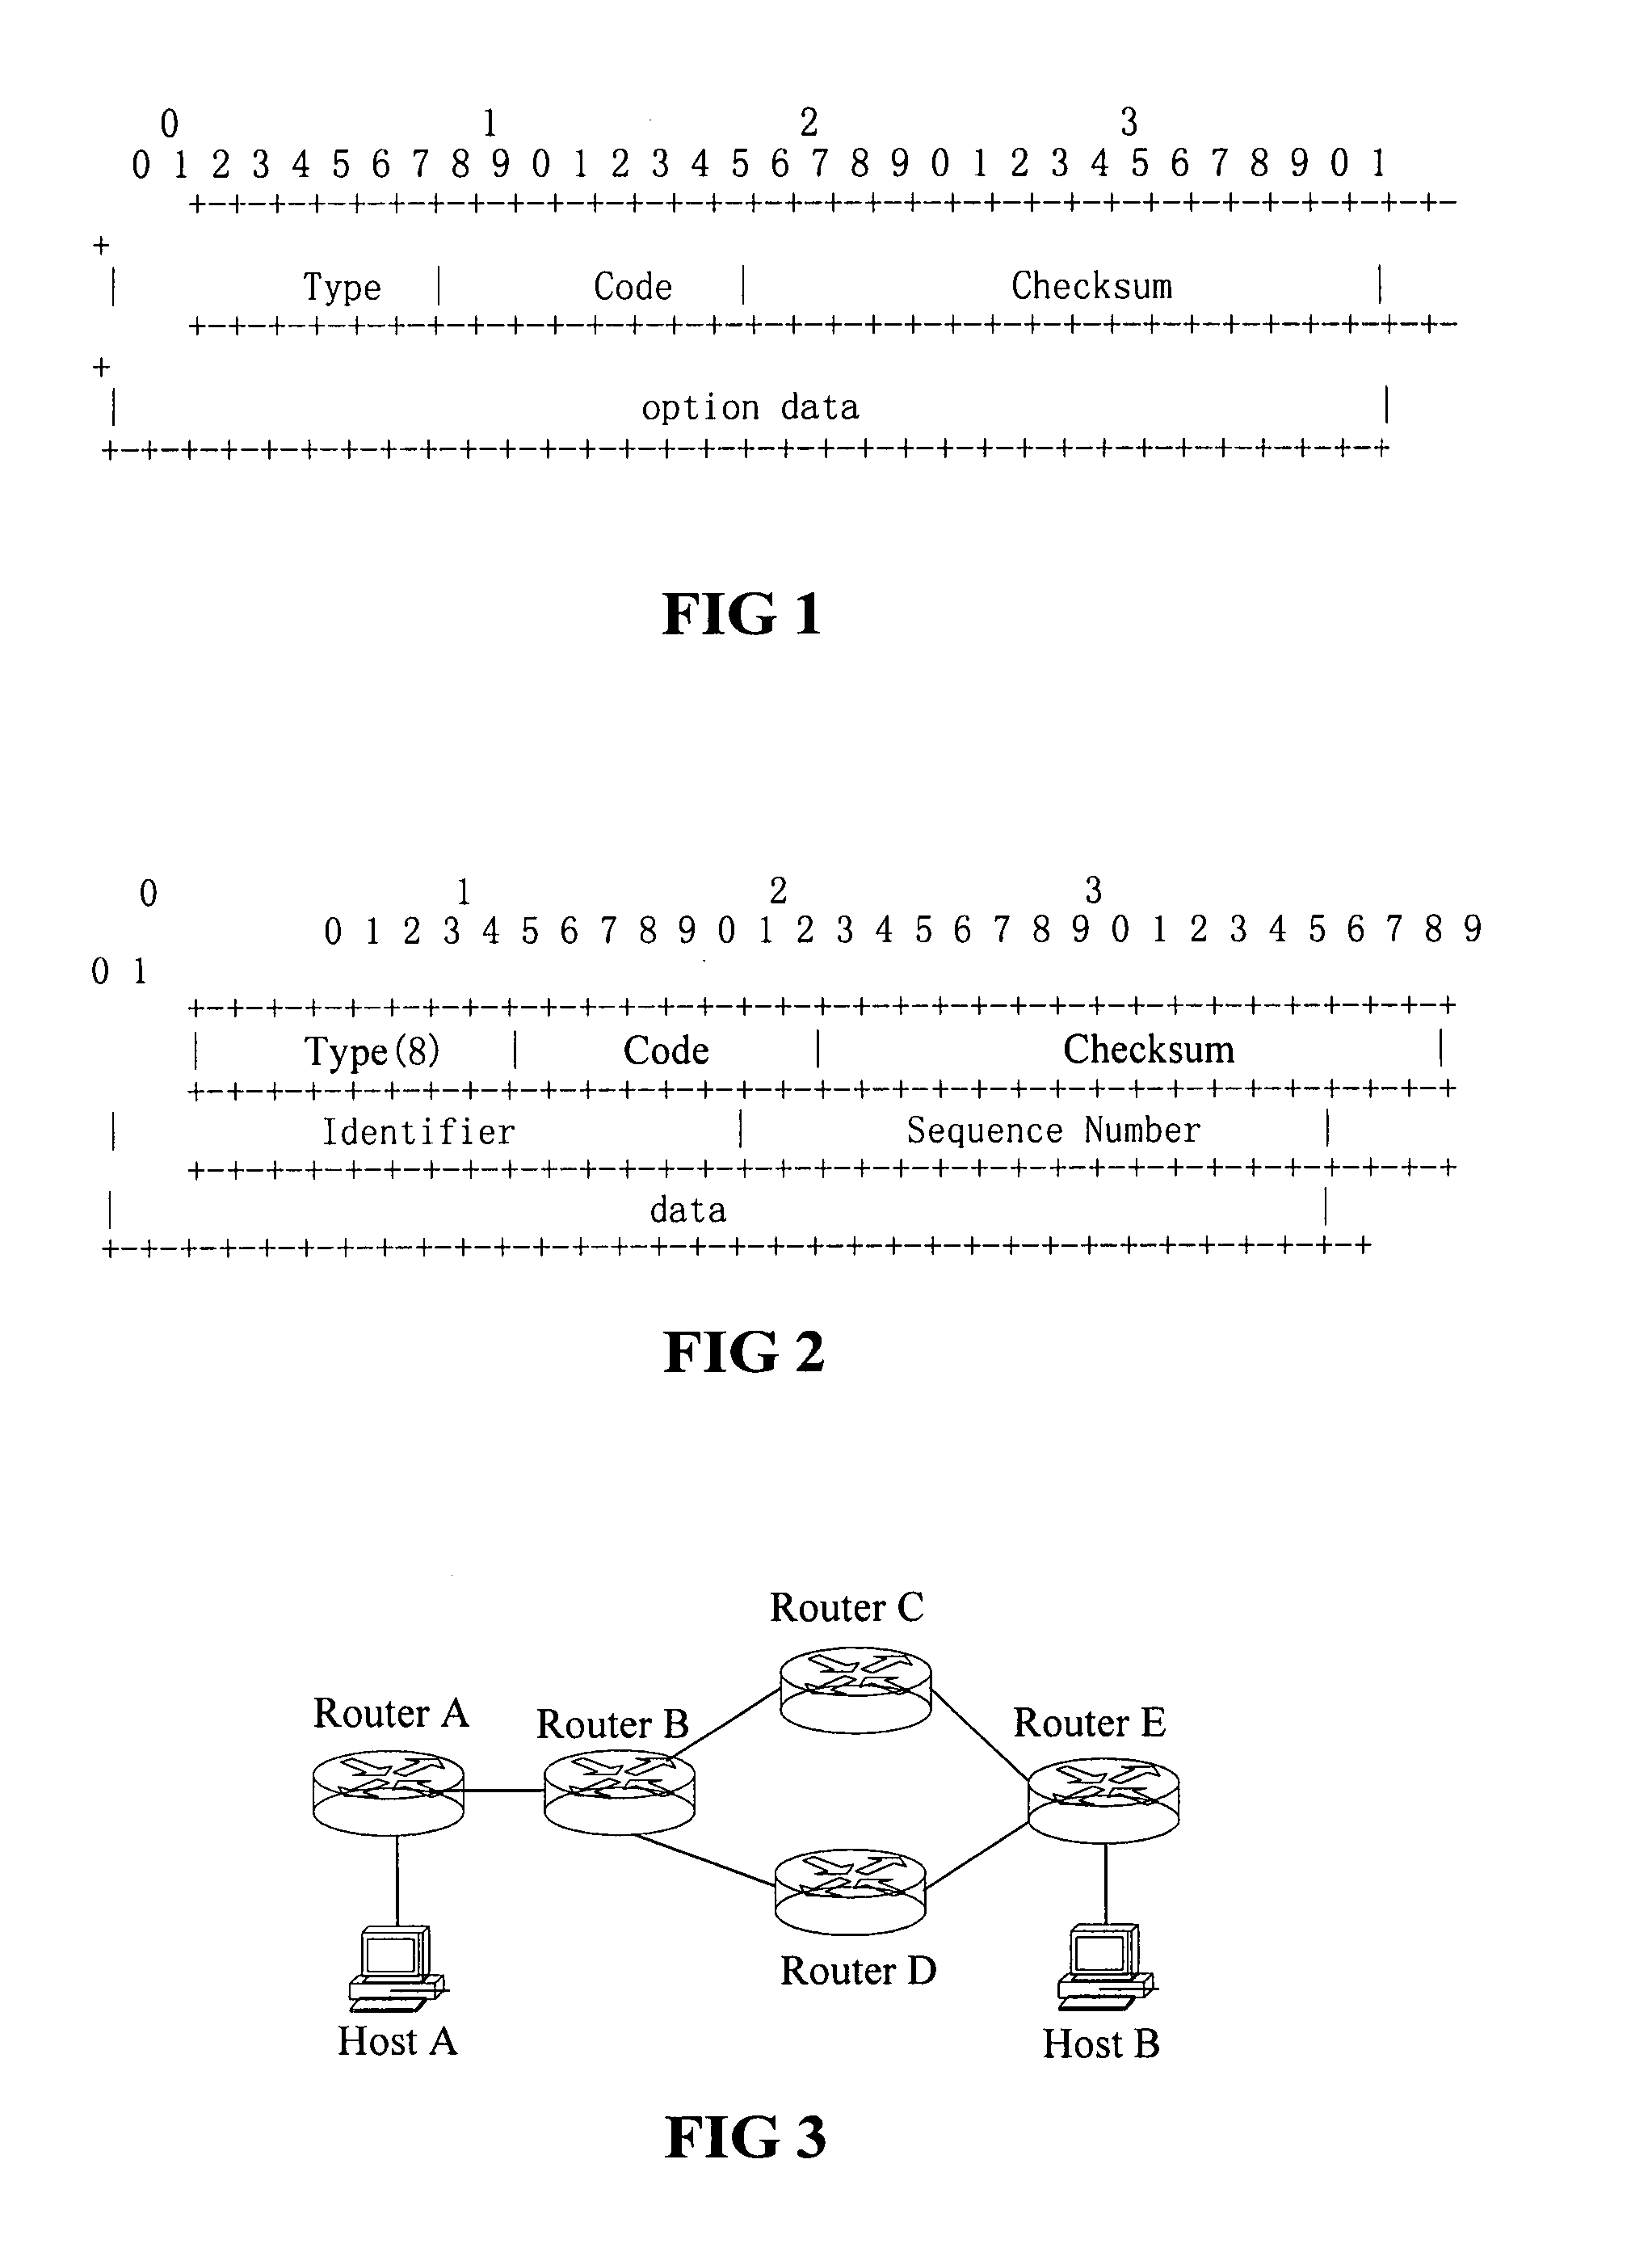 Method for Diagnosing the Router Which Supports Policy-Based Routing